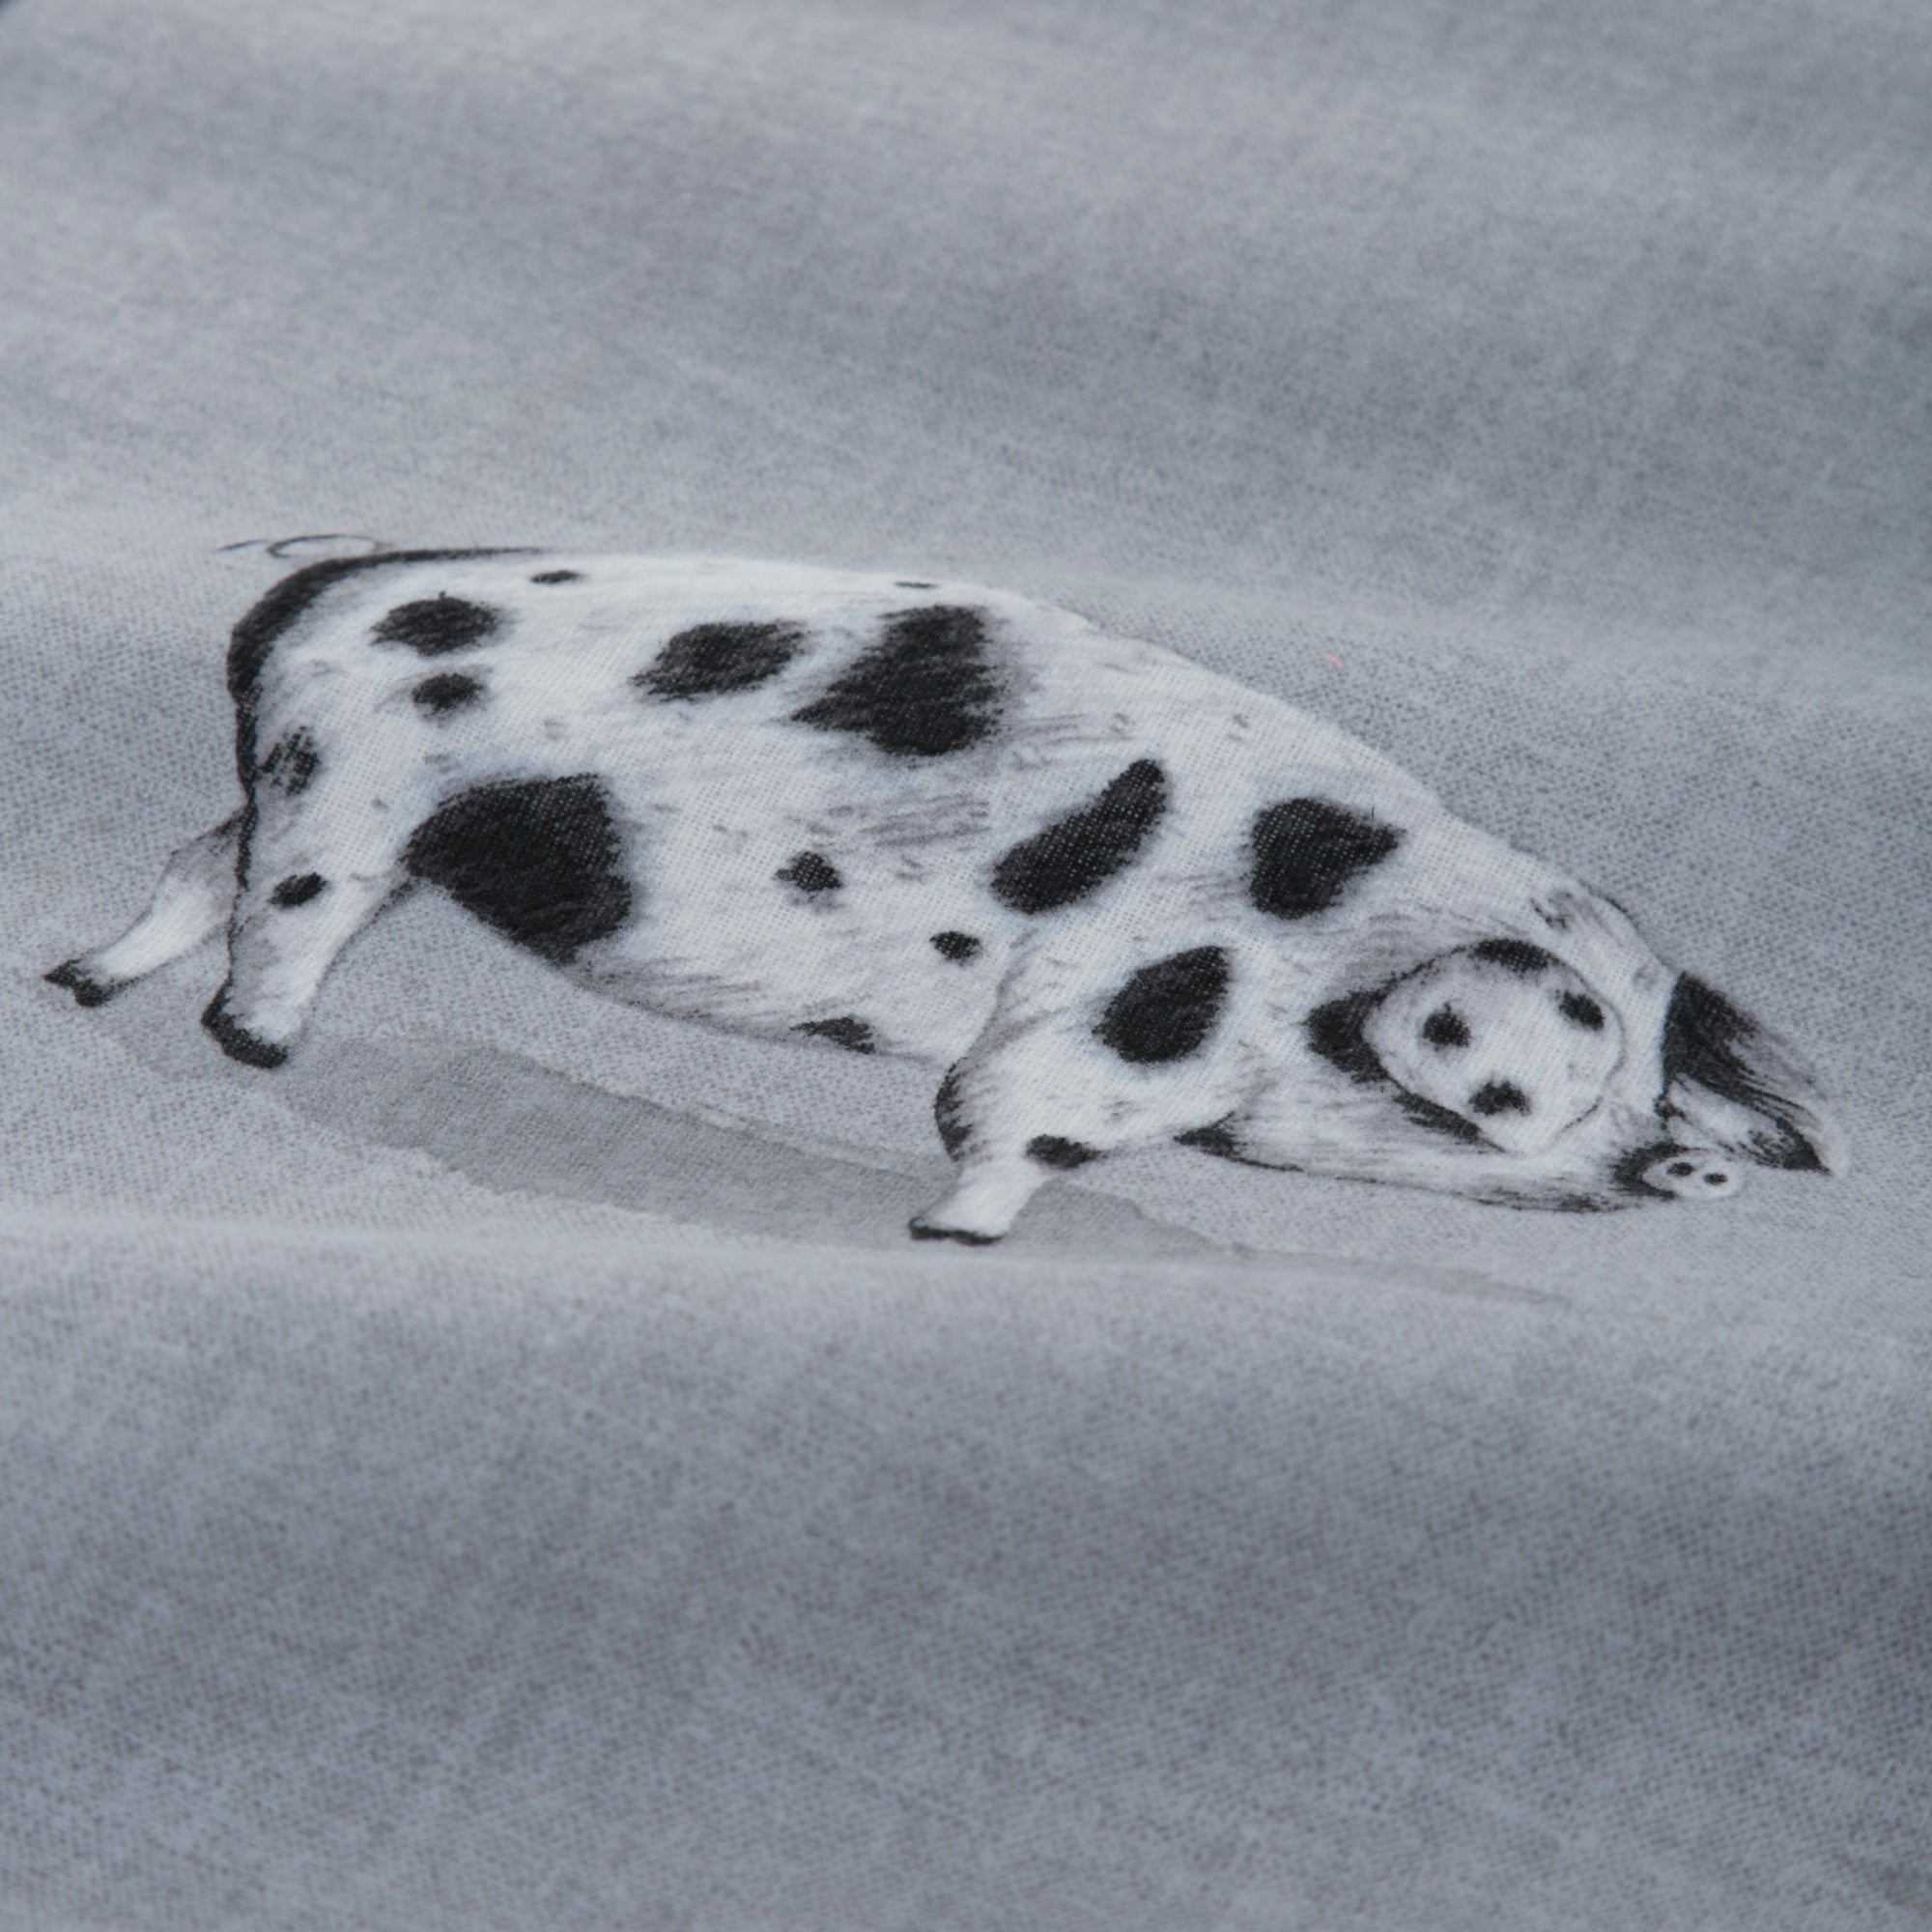 Duvet Cover Set Cosy Pig by Fusion Snug in Grey